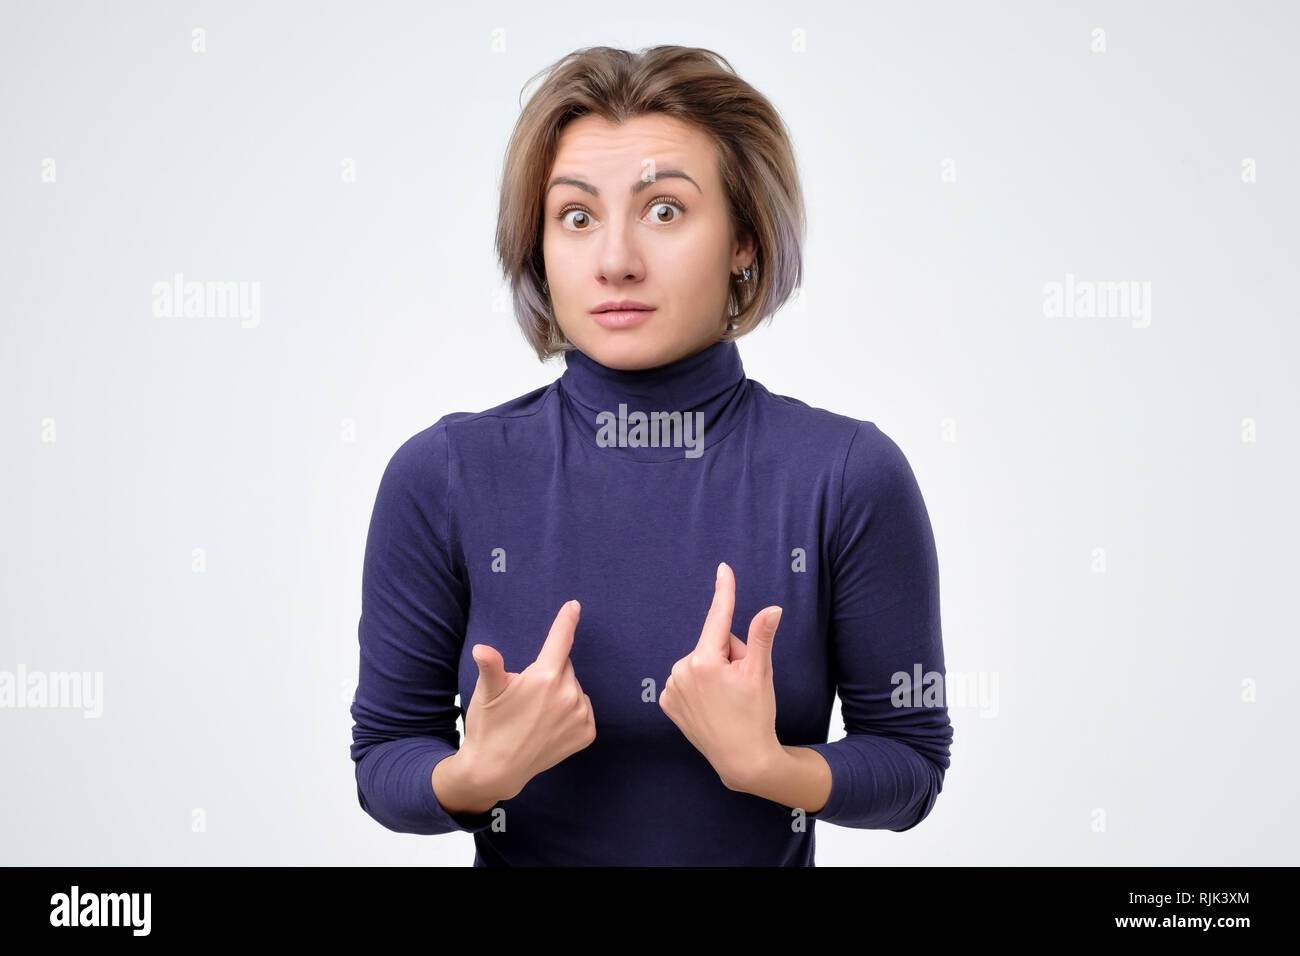 Woman verbally defending herself, having perplexed expression Stock Photo